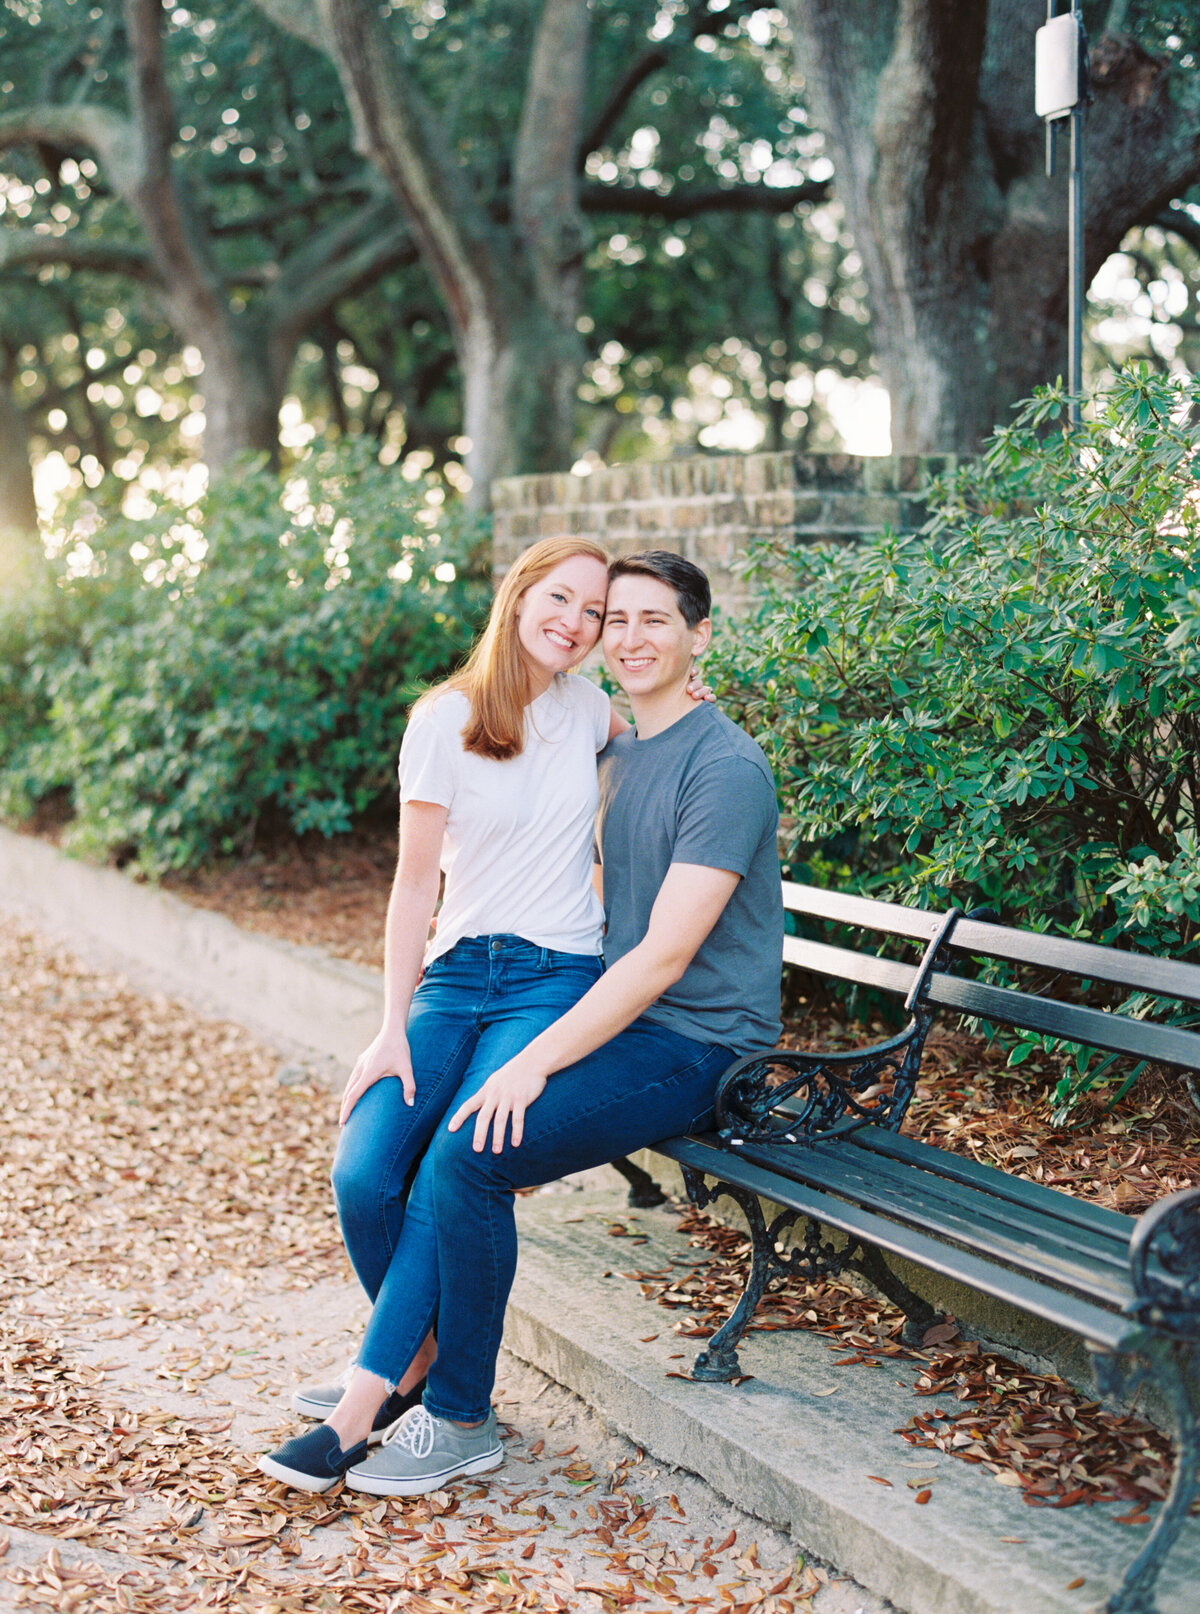 film_charleston_engagement_sunrise_white_point_gardens_battery_casual_outfits_kailee_dimeglio_photography-19